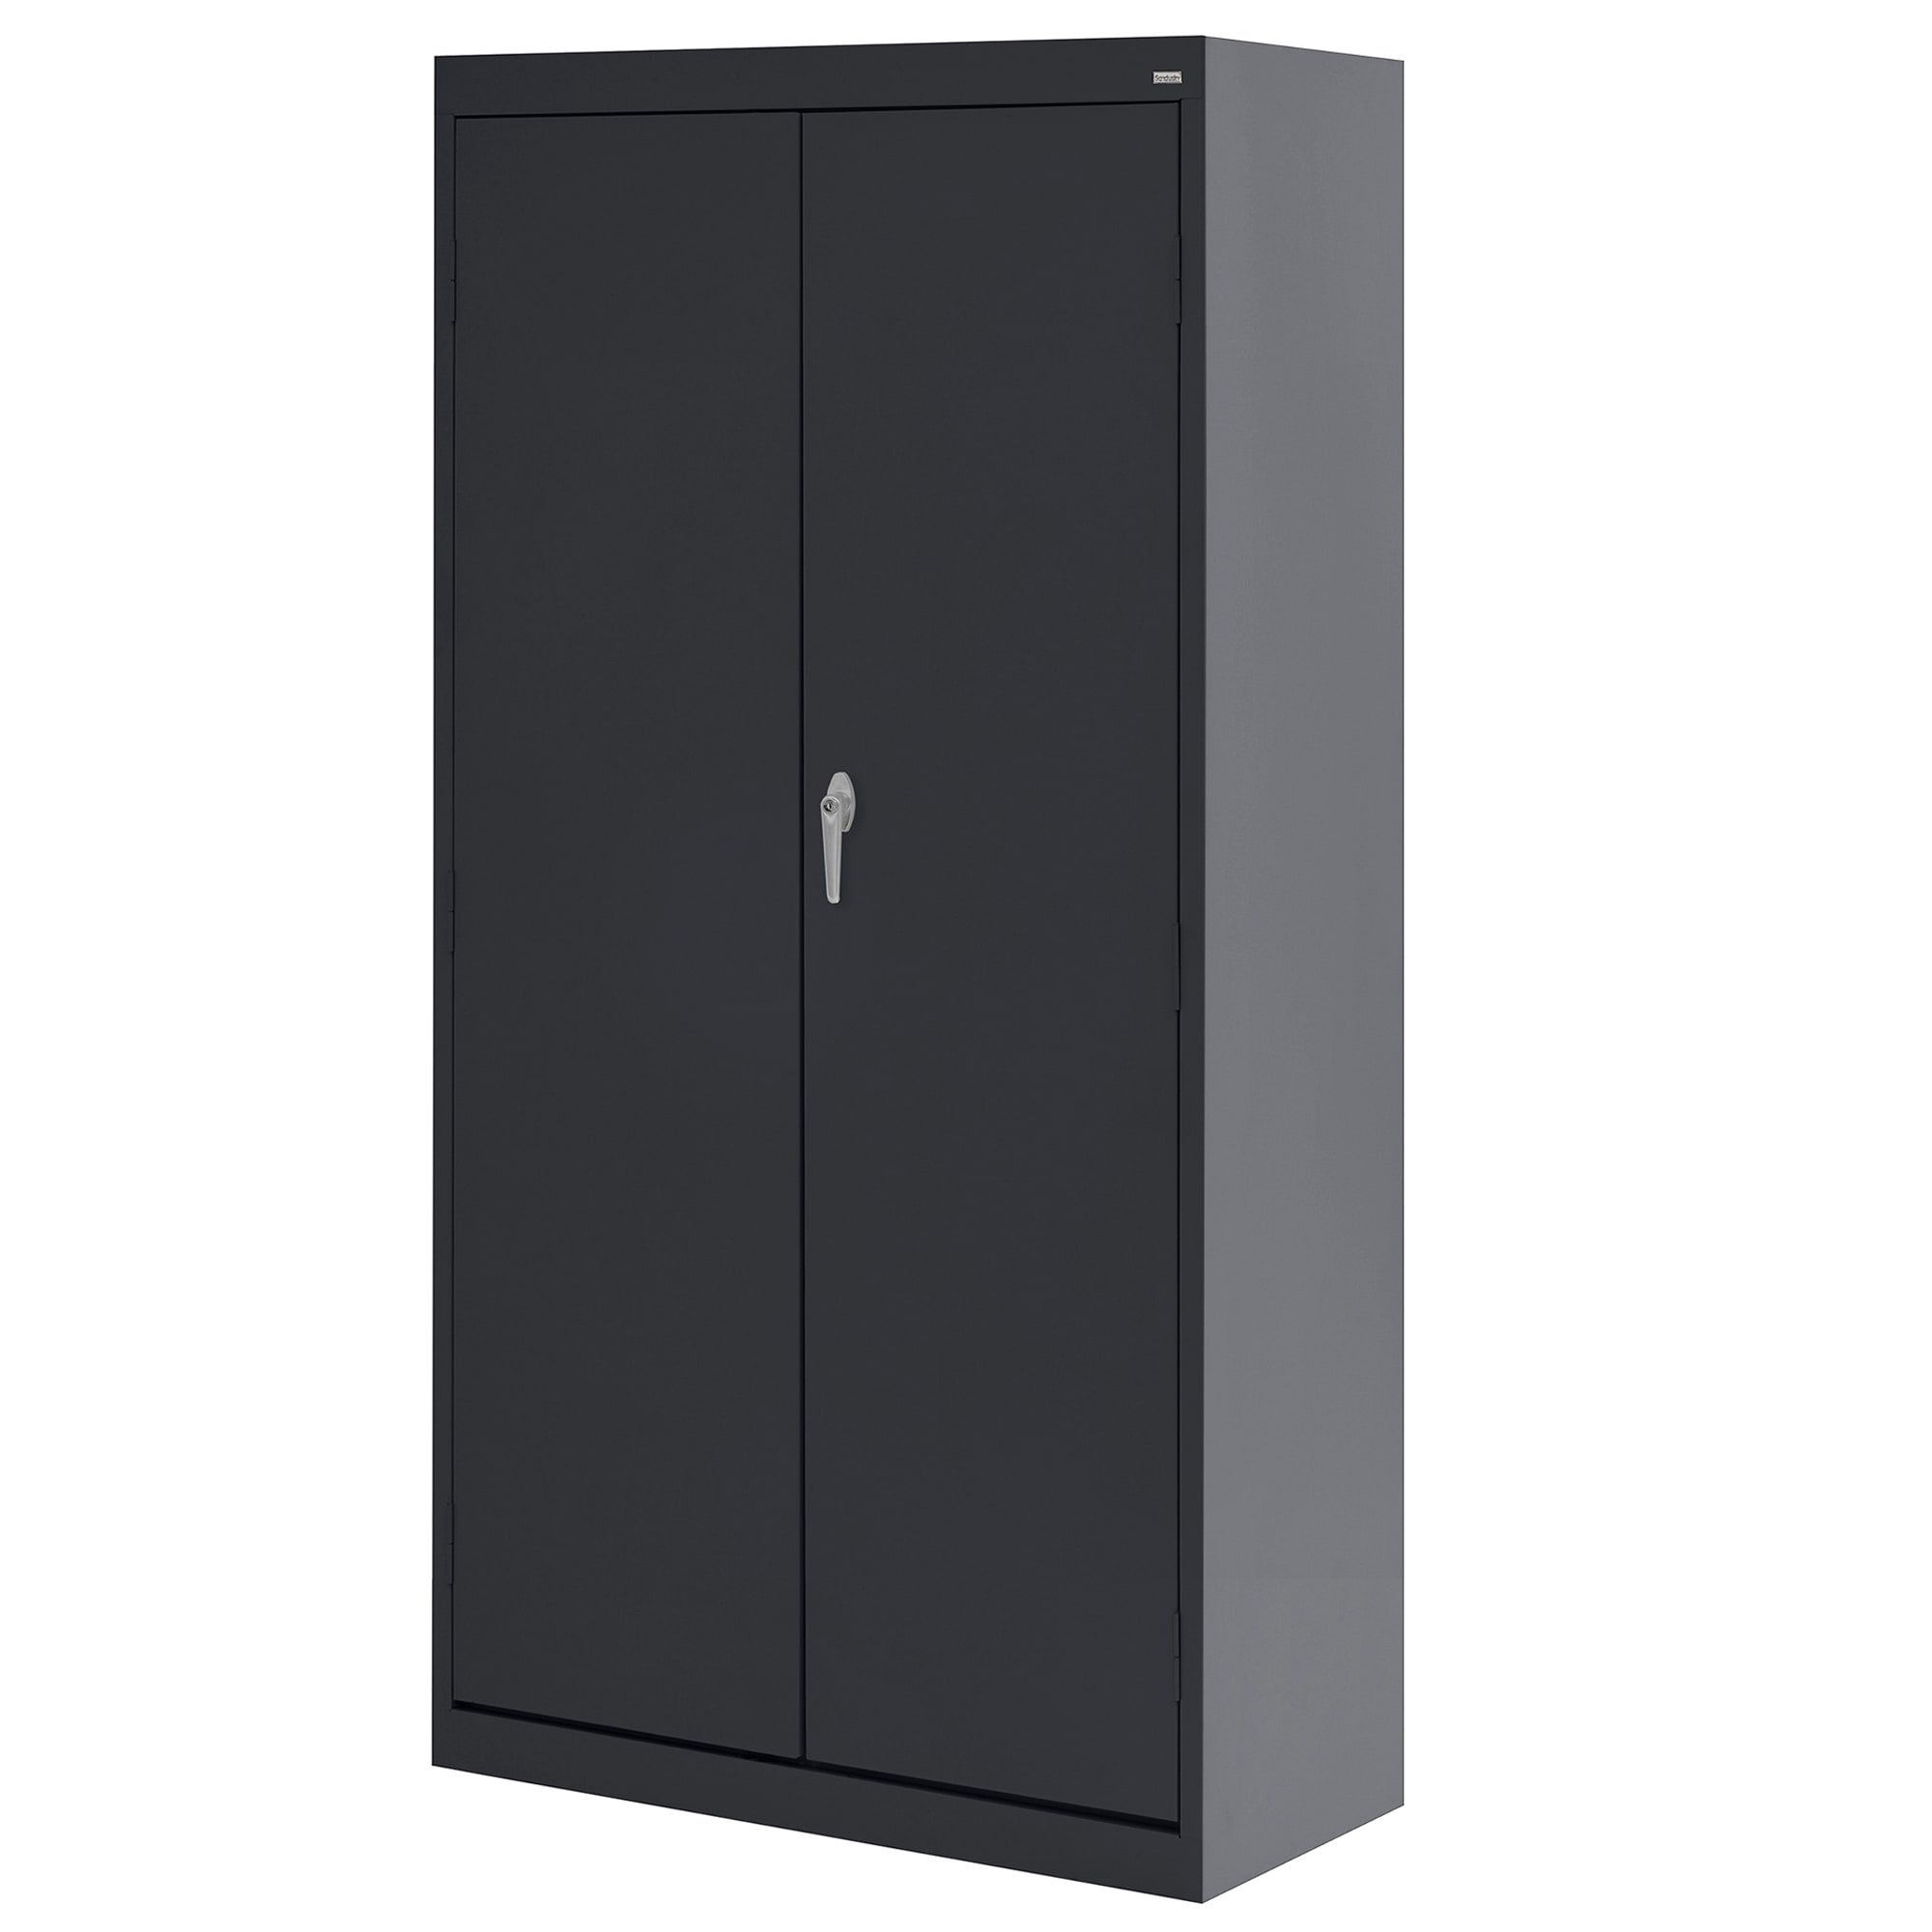 Janitorial Cabinet - 36 x 18 x 64, Gray